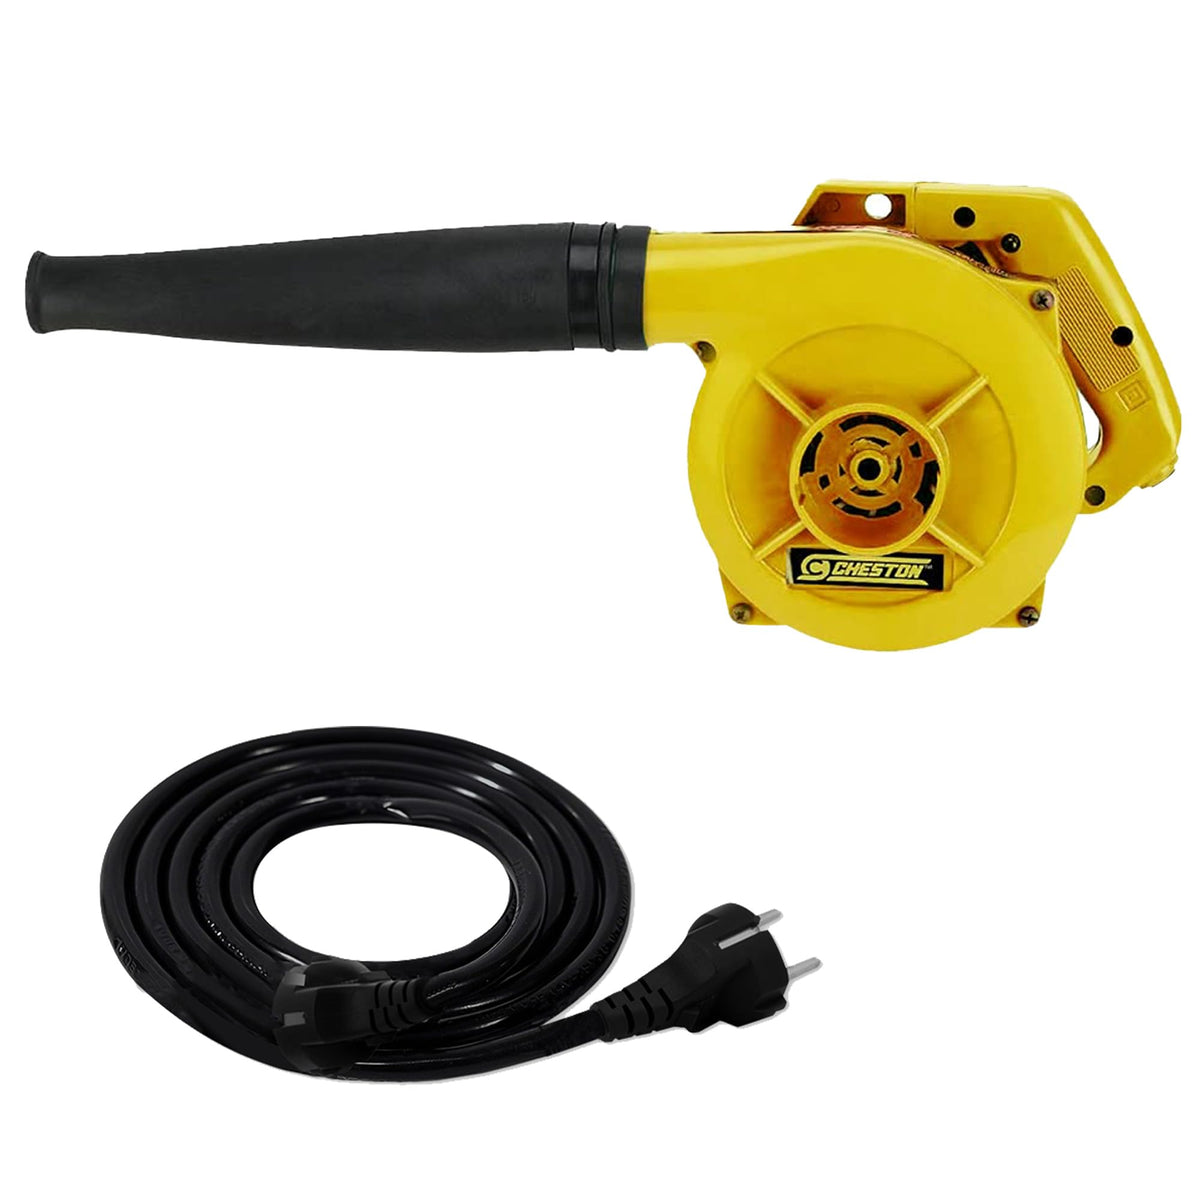 Cheston Electric Air Blower 500W Speed 17000 RPM 200V Dust Cleaner for Electrical Gadgets, Kitchen Appliances, Keyboard Cleaning (Yellow) (Air Blower and Extension Cord) (Yellow)